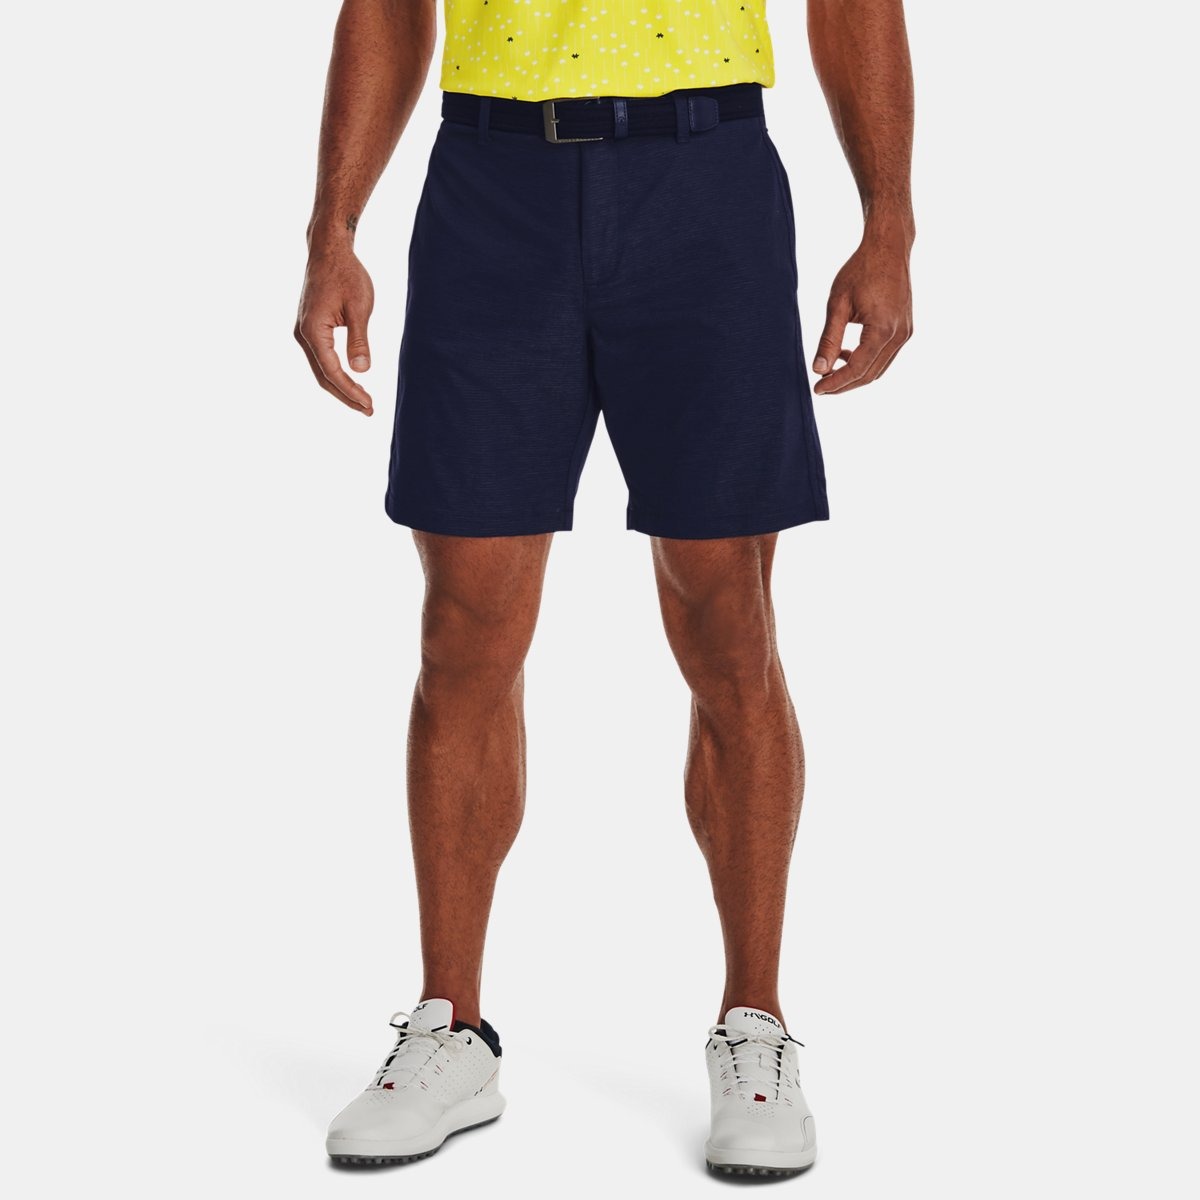 Men's Blue Shorts from Under Armour GOOFASH